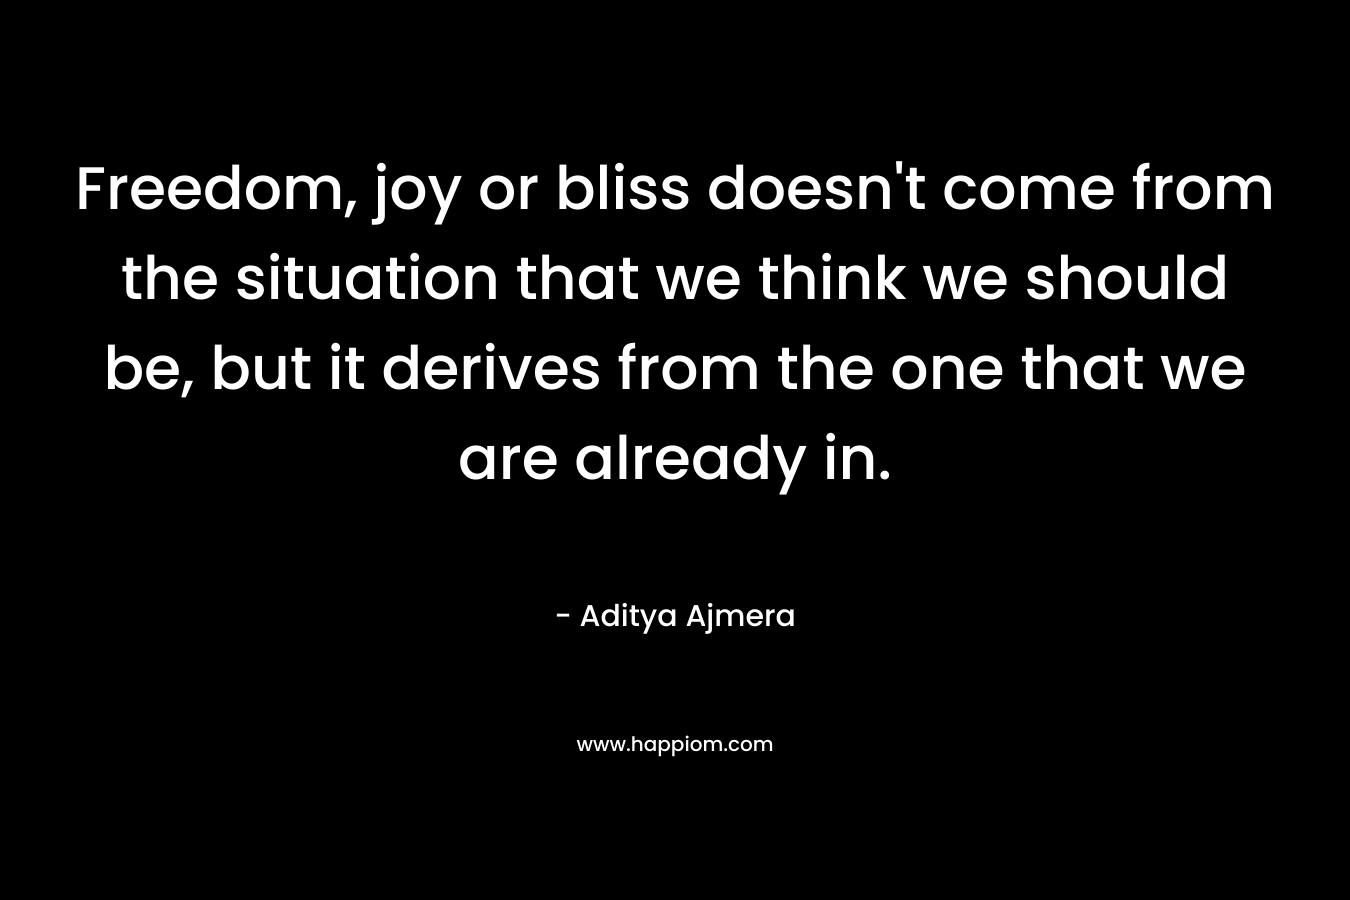 Freedom, joy or bliss doesn’t come from the situation that we think we should be, but it derives from the one that we are already in. – Aditya Ajmera